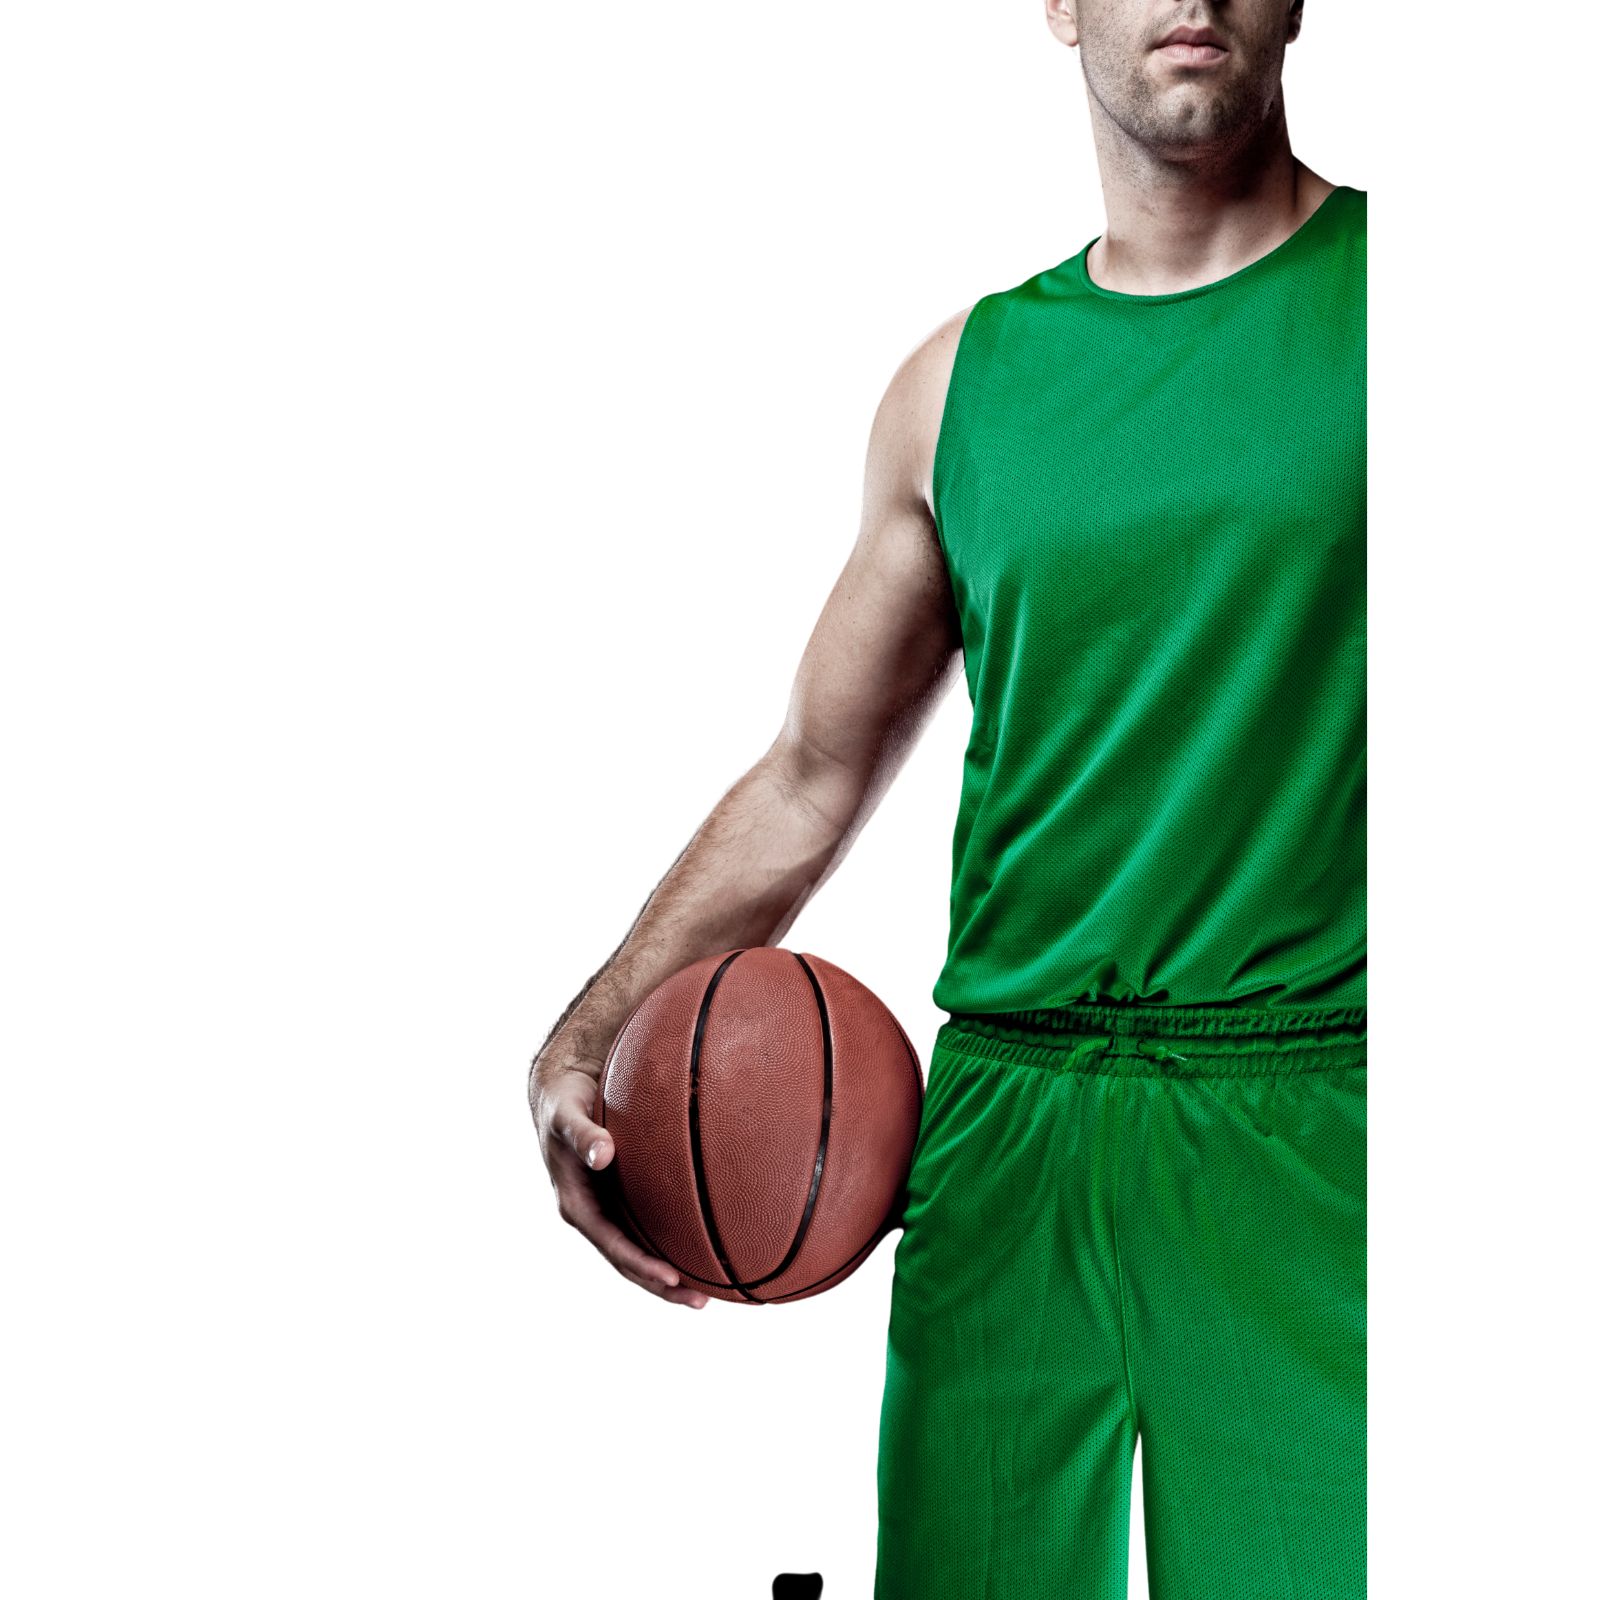 Green Basketball Jersey Manufactured By The Custom Basketball Jerseys Manufacturer And Supplier In Pakistan, X Athletic Wear.